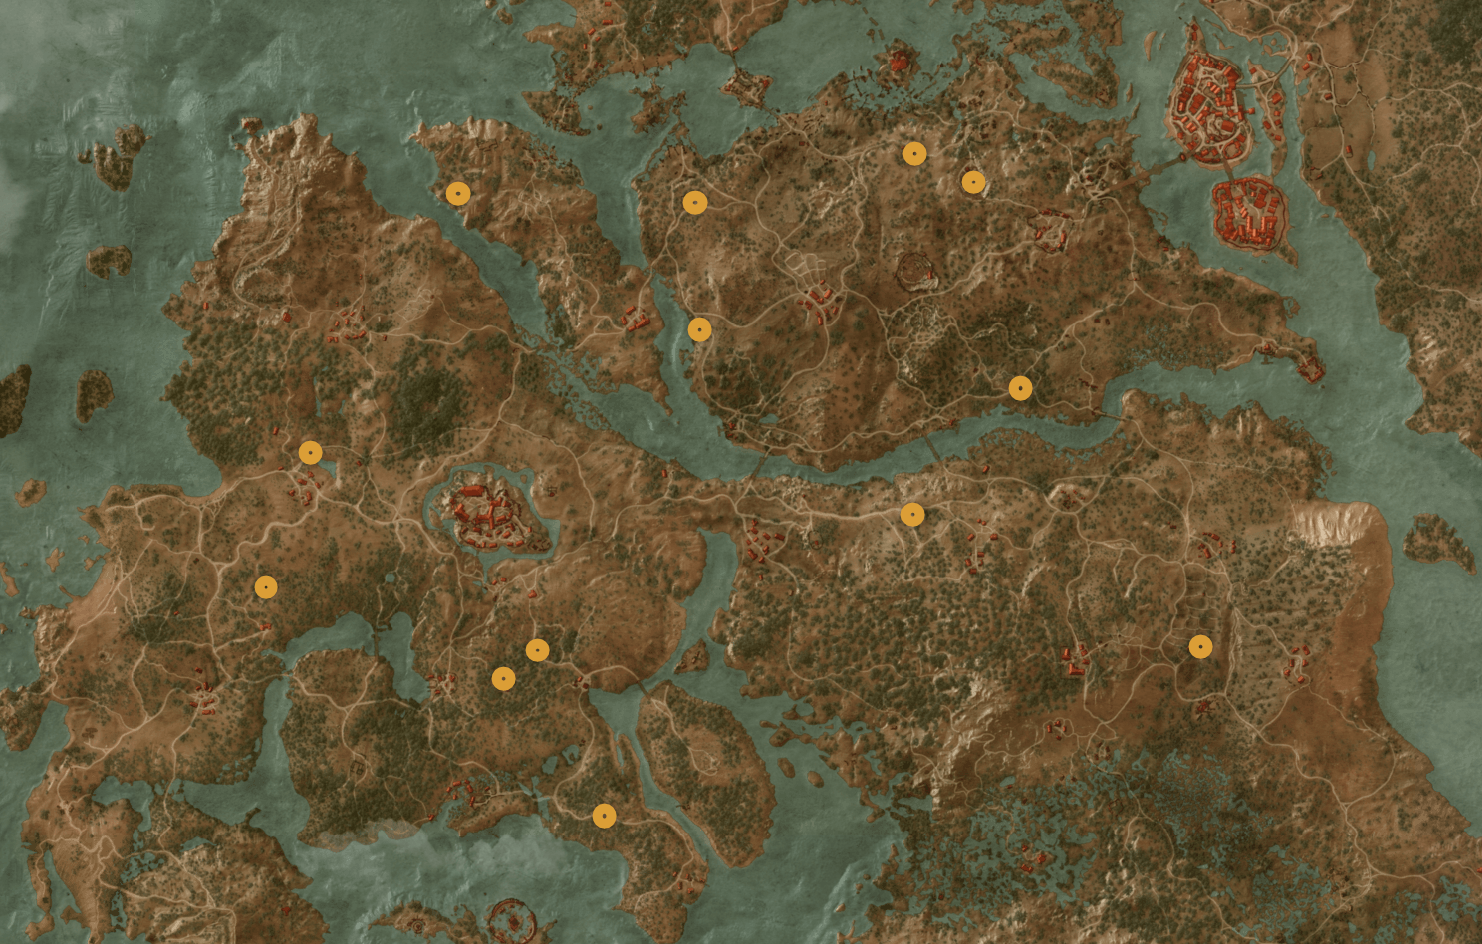 A Checklist for Fail-able Side Quests in The Witcher 3: Wild Hunt : r/ witcher